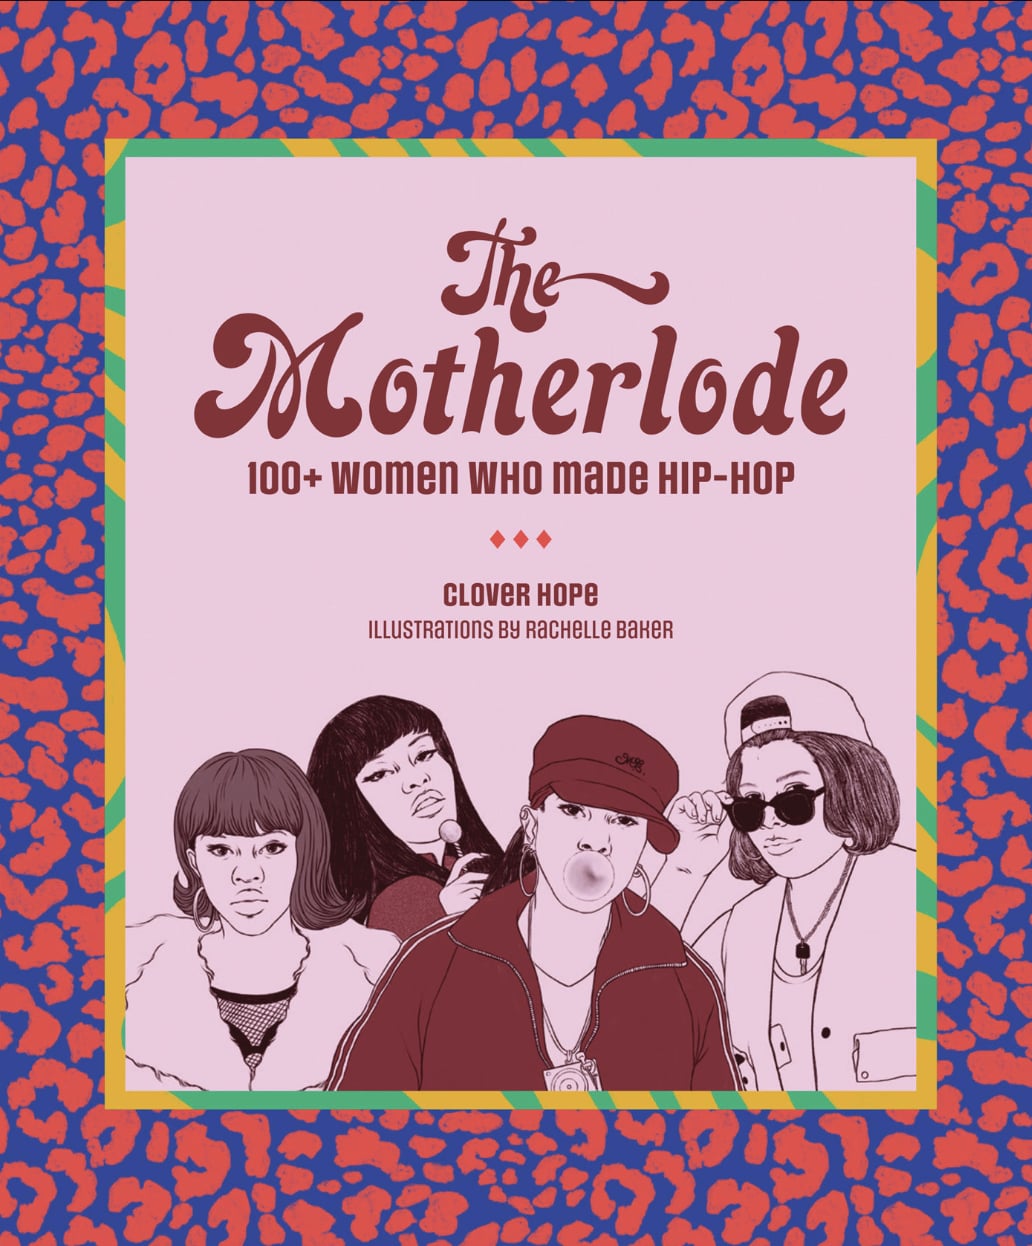 <p><a href="https://www.amazon.com/Motherlode-100-Women-Made-Hip-Hop-ebook/dp/B084VRFPS5/">BUY NOW</a></p><p>$14</p><p><strong><a href="https://www.amazon.com/Motherlode-100-Women-Made-Hip-Hop-ebook/dp/B084VRFPS5/" class="ga-track">"The Motherlode: 100+ Women Who Made Hip-Hop" by Clover Hope</a> ($14)</strong></p> <p>"The Motherlode: 100+ Women Who Made Hip-Hop" is a deep dive into the lives and work of more than 100 women who helped hip-hop become what it is today, from Lauryn Hill and Missy Elliott to Nicki Minaj and Cardi B. It showcases the vast variety of experiences that women hip-hop artists can have in the industry; some of these artists found themselves pigeonholed by restrictive sexism, some had to fight hard to be heard, some were able to break through the noise, some became massive successes, and others earned respect but not stardom. Ultimately, this beautiful collection, illustrated by Rachelle Baker, is a loving tribute to the many incredible women who have defined hip-hop over the years.</p>